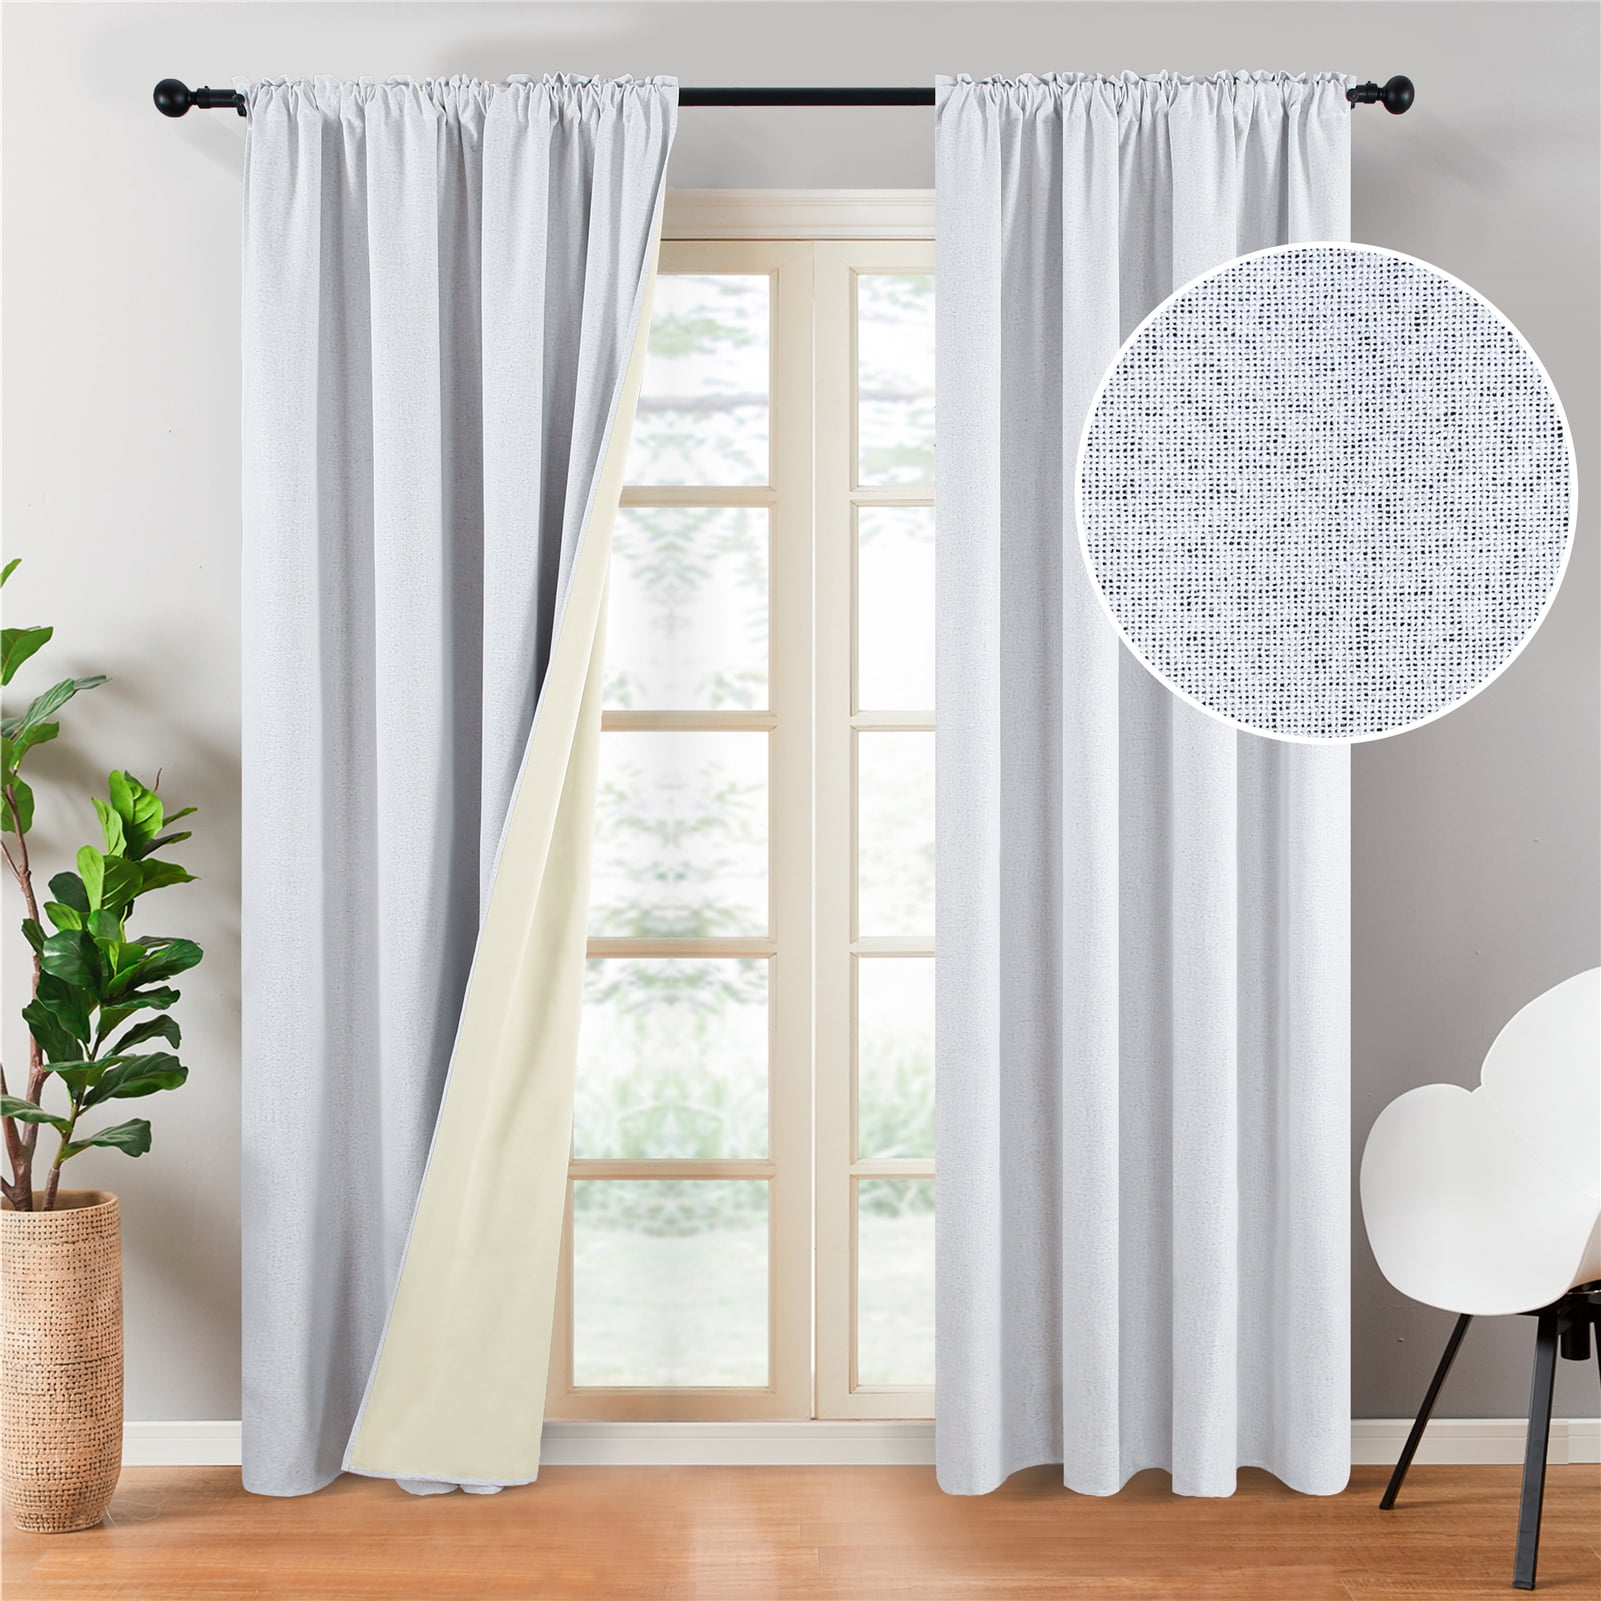 Topfinel Faux Linen 100 Blackout Heavy Curtains 96 Inches Length For Bedroom Living Room Rod Pocket Window Thermal Insulated Soundproof Burlap Ds 2 Panels 52 X Inch Grayish White Com